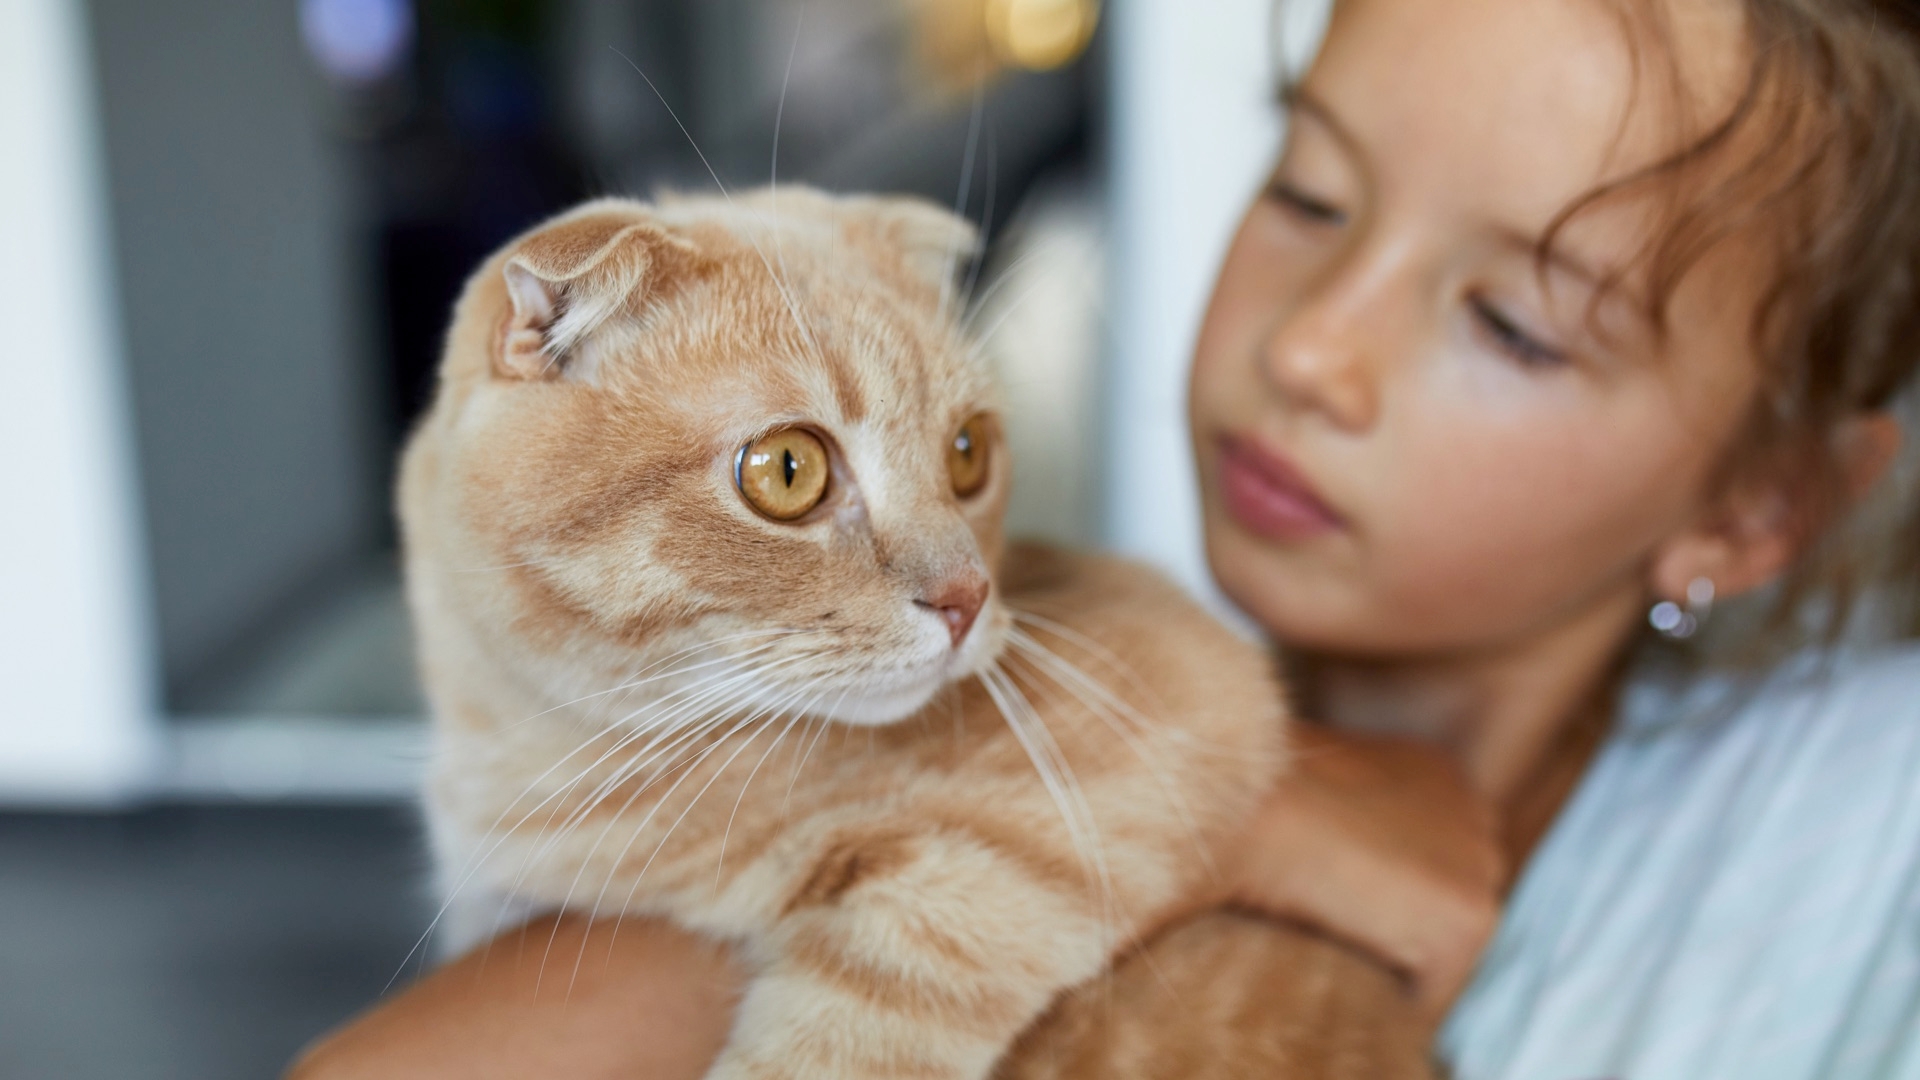 How To Keep Children Healthy Around Animals, Infants And Young Children